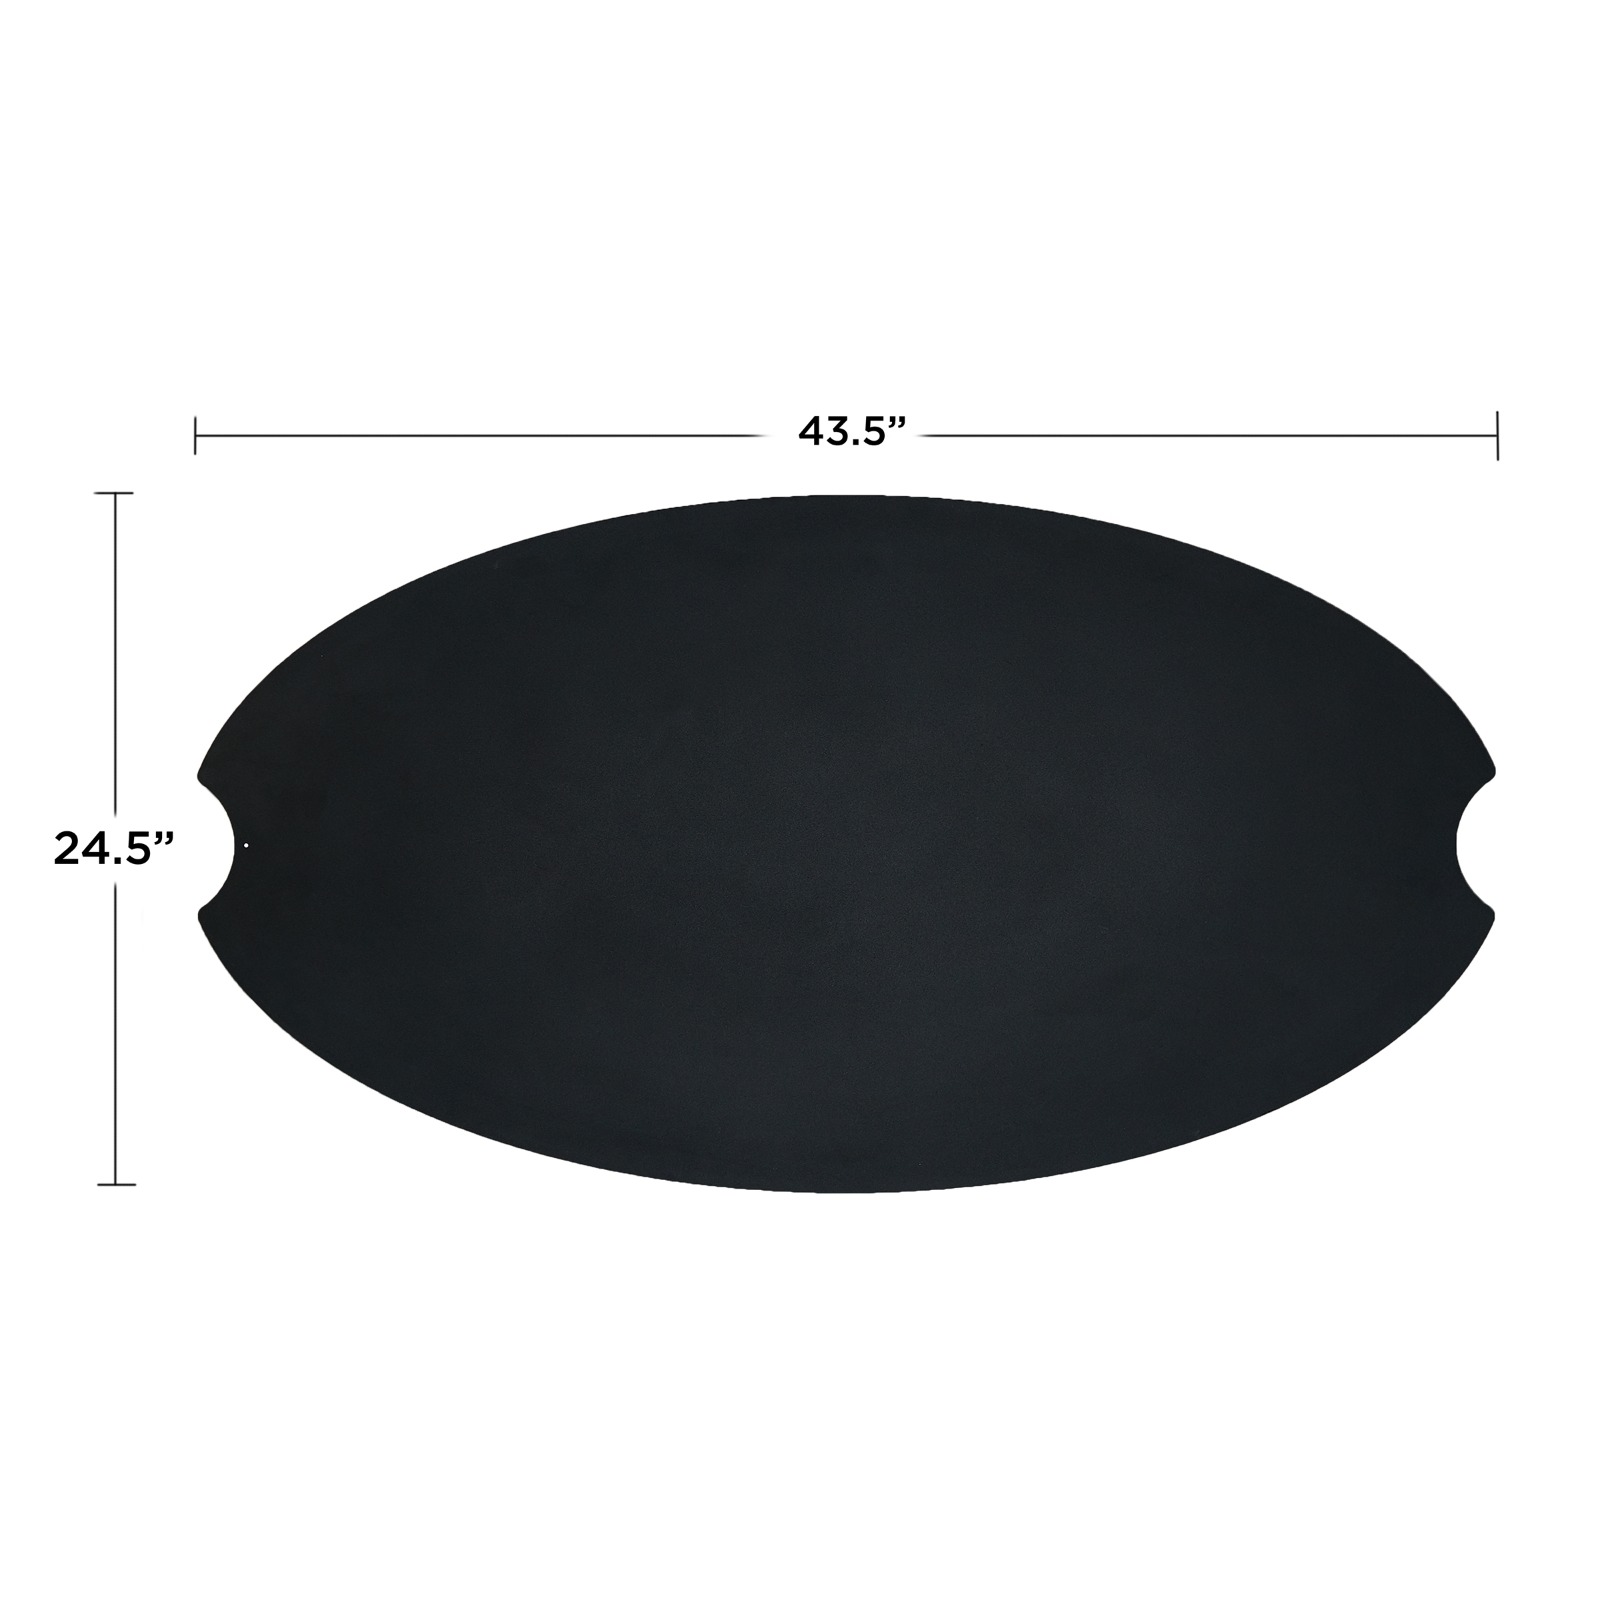 Riverside Oval Steel Lid Protective Cover for Propane or Natural Gas Fire Table Fire Bowl Fire Pit Outdoor Fireplace